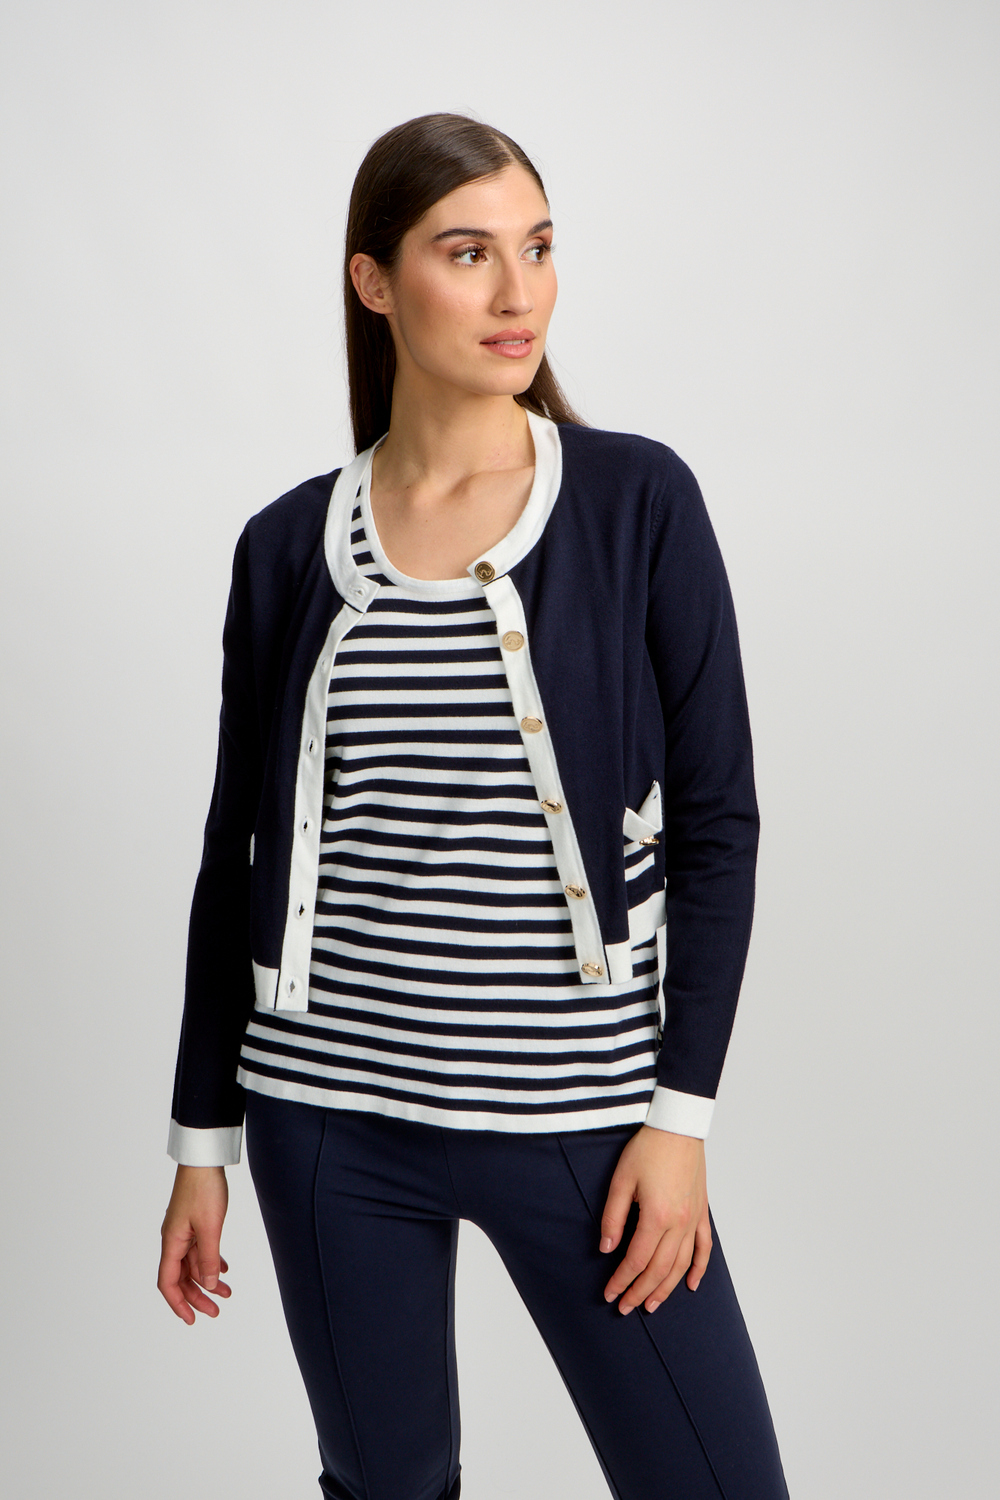 Cropped Casual Cardigan Style 80704-6100. Navy